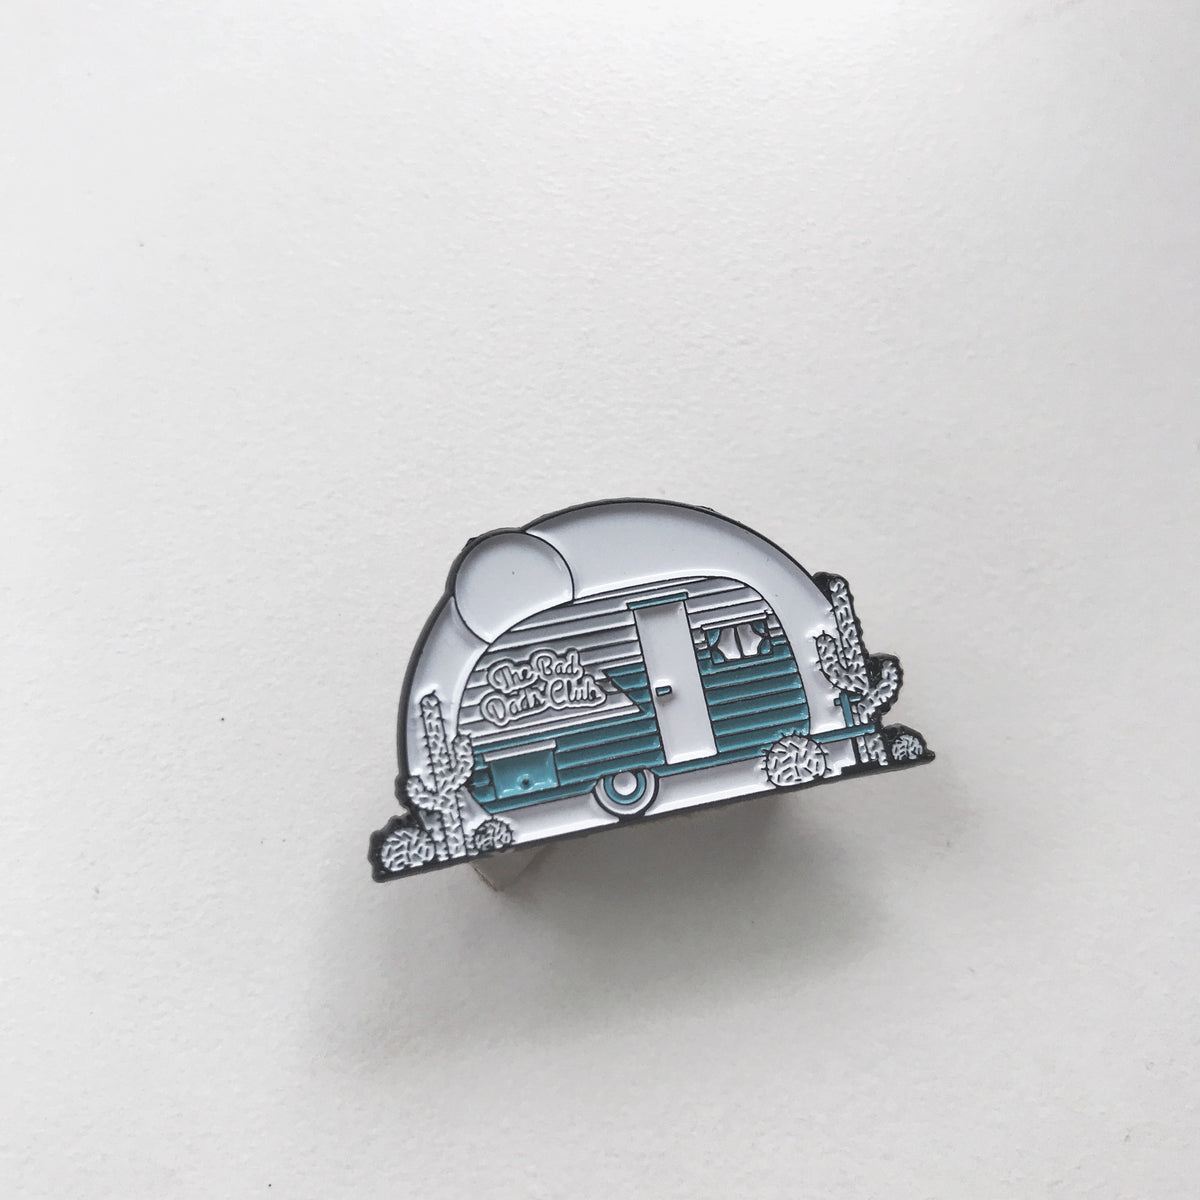 Camper Enamel Pin by The Bad Dads Club - THE BAD DADS CLUB